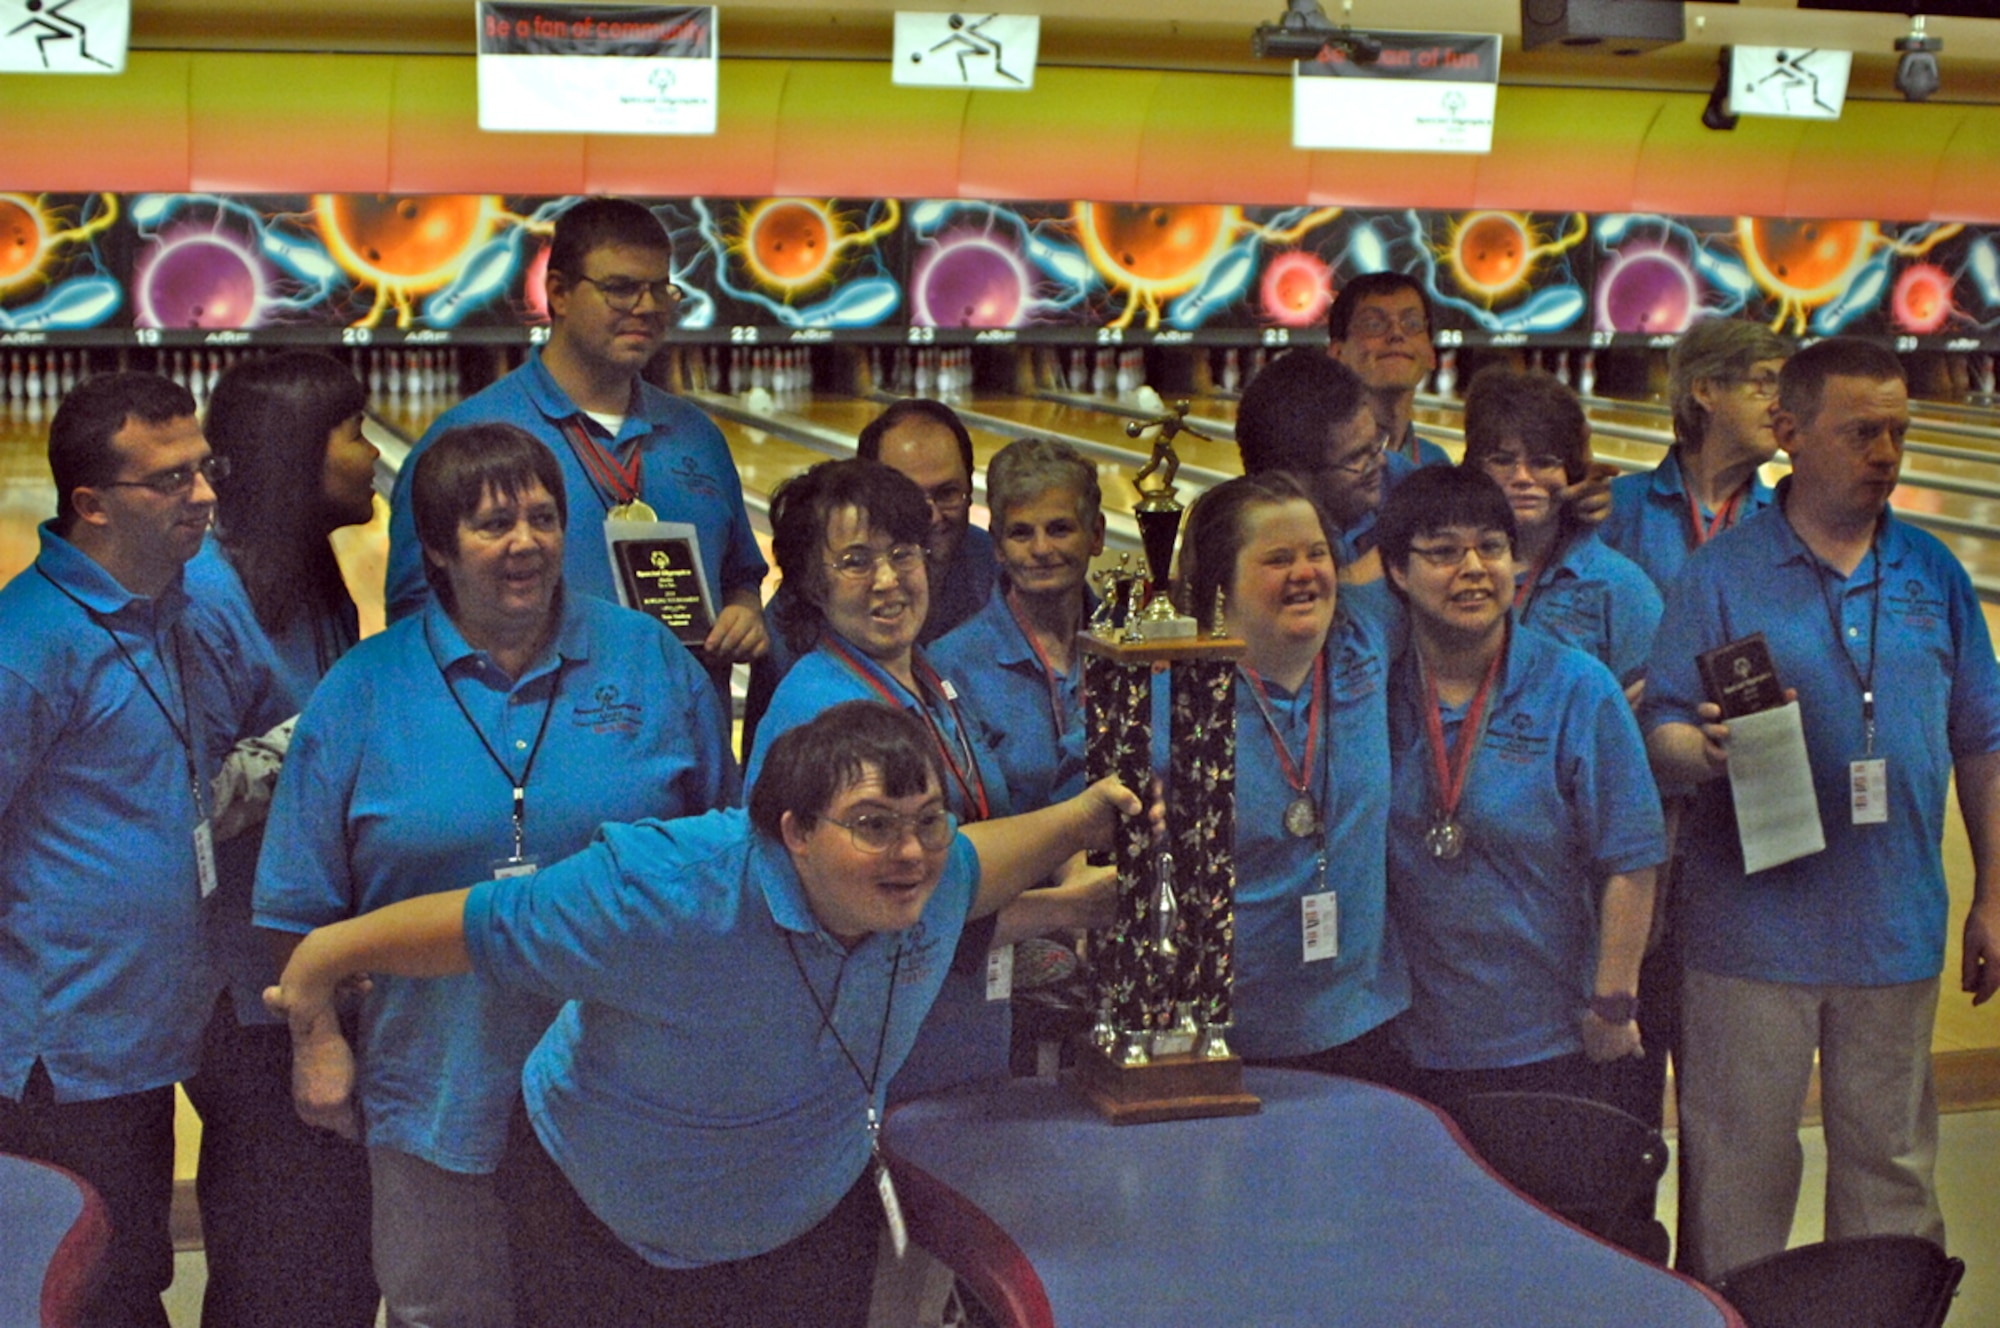 The Central Peninsula Tigers celebrate their accomplishments at the conclusion of the Special Olympics 2010 State Bowling Tournament at Joint Base Elmendorf-Richardson’s Polar Bowl, Nov. 21. Approximately 240 athletes from across the state participated in this year’s tournament. (U.S. Air Force photo/A1C Jack Sanders)